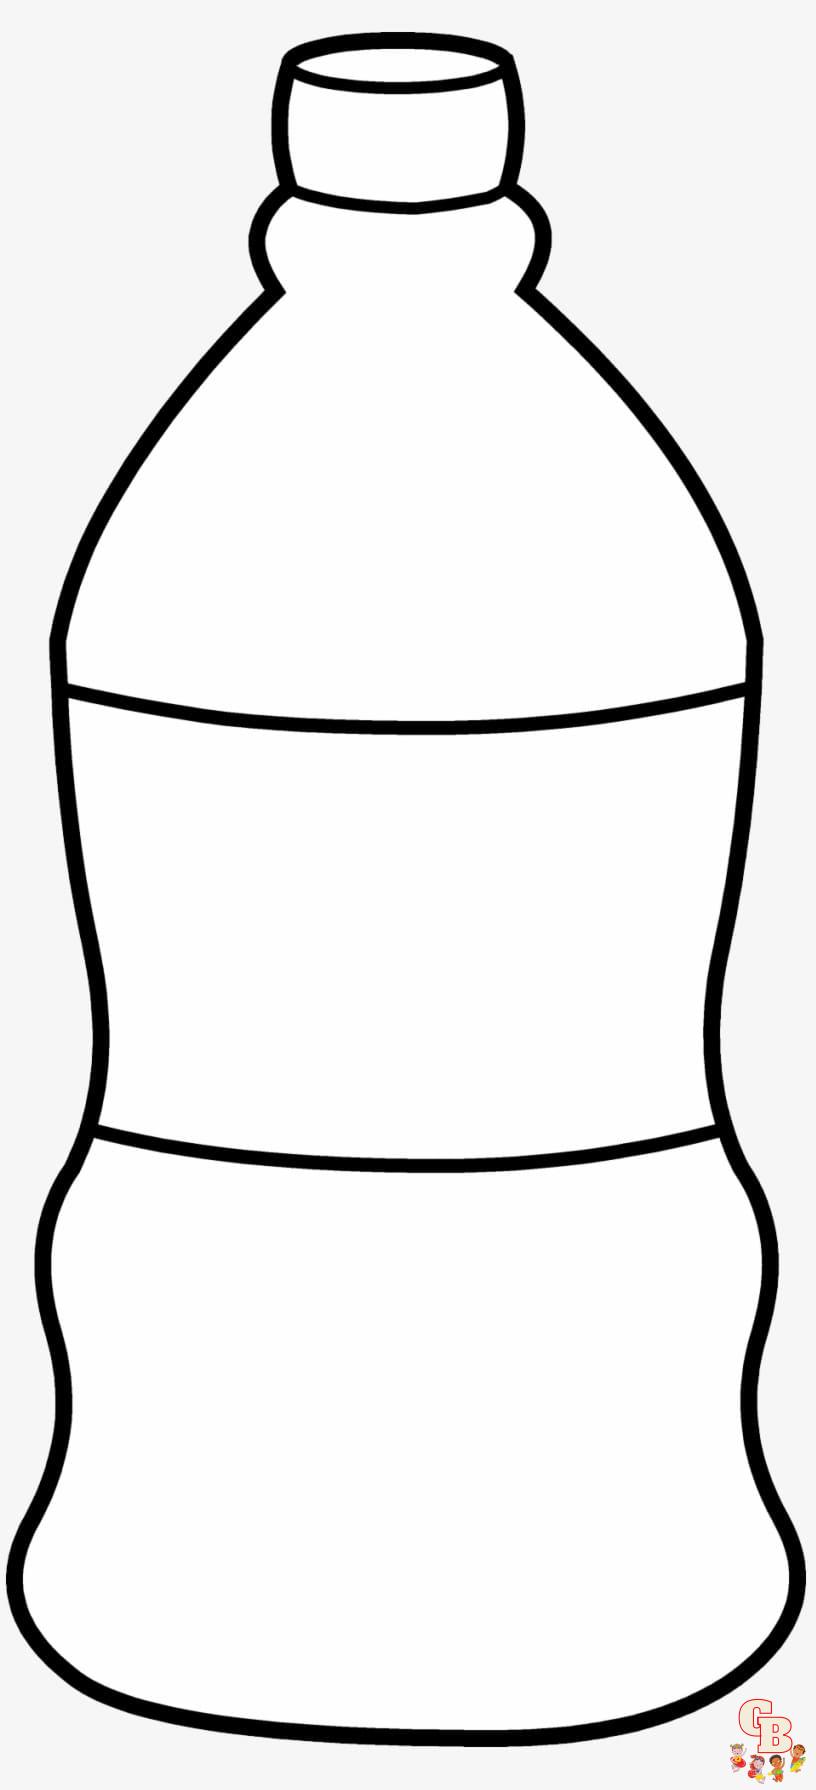 Water bottle Coloring Sheets free